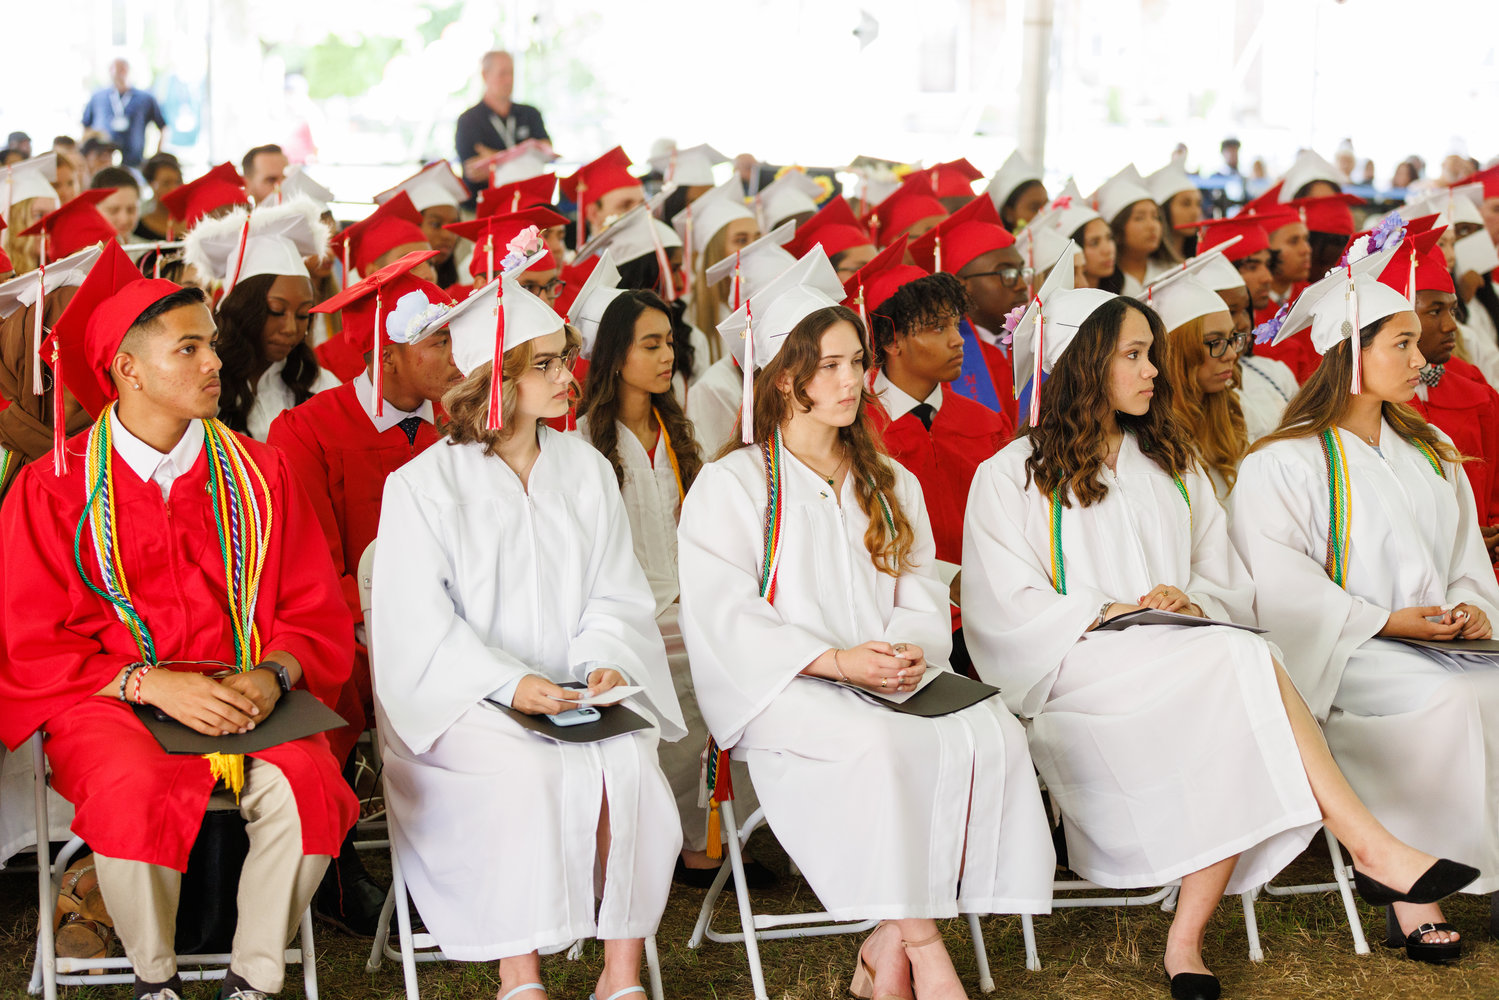 The South High Falcons class of 2022, far left, during their commencement ceremony last week.